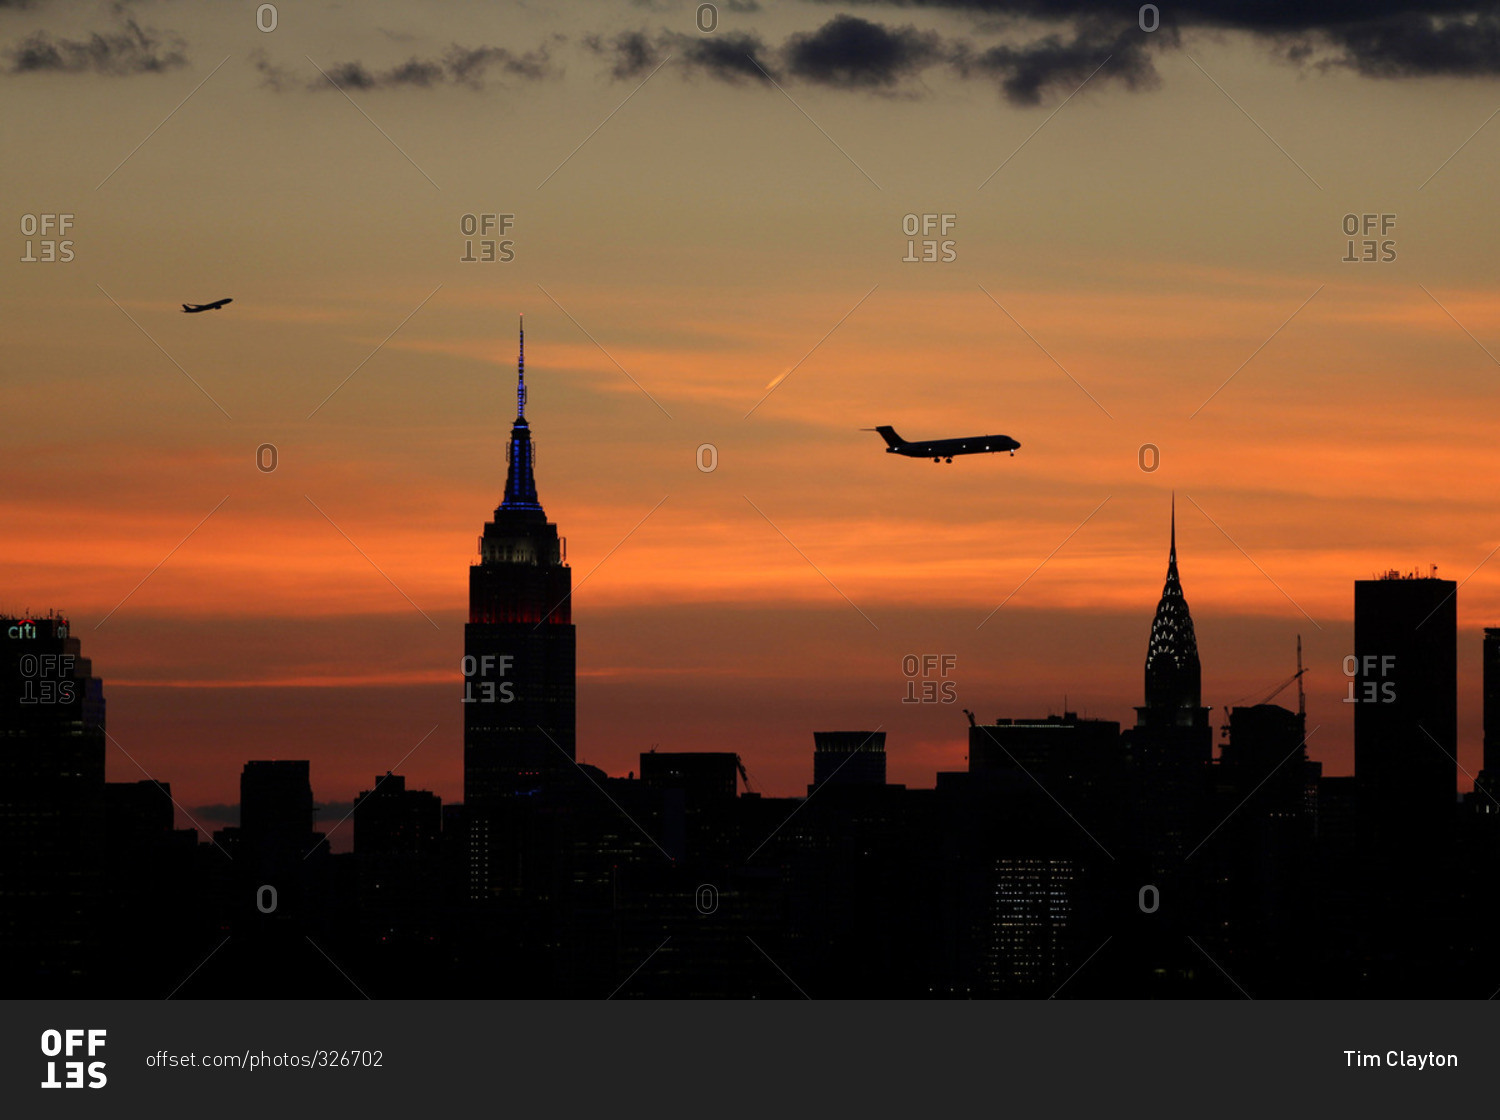 The sun setting behind the Manhattan skyline in New York City viewed from Flushing, Queens, New York